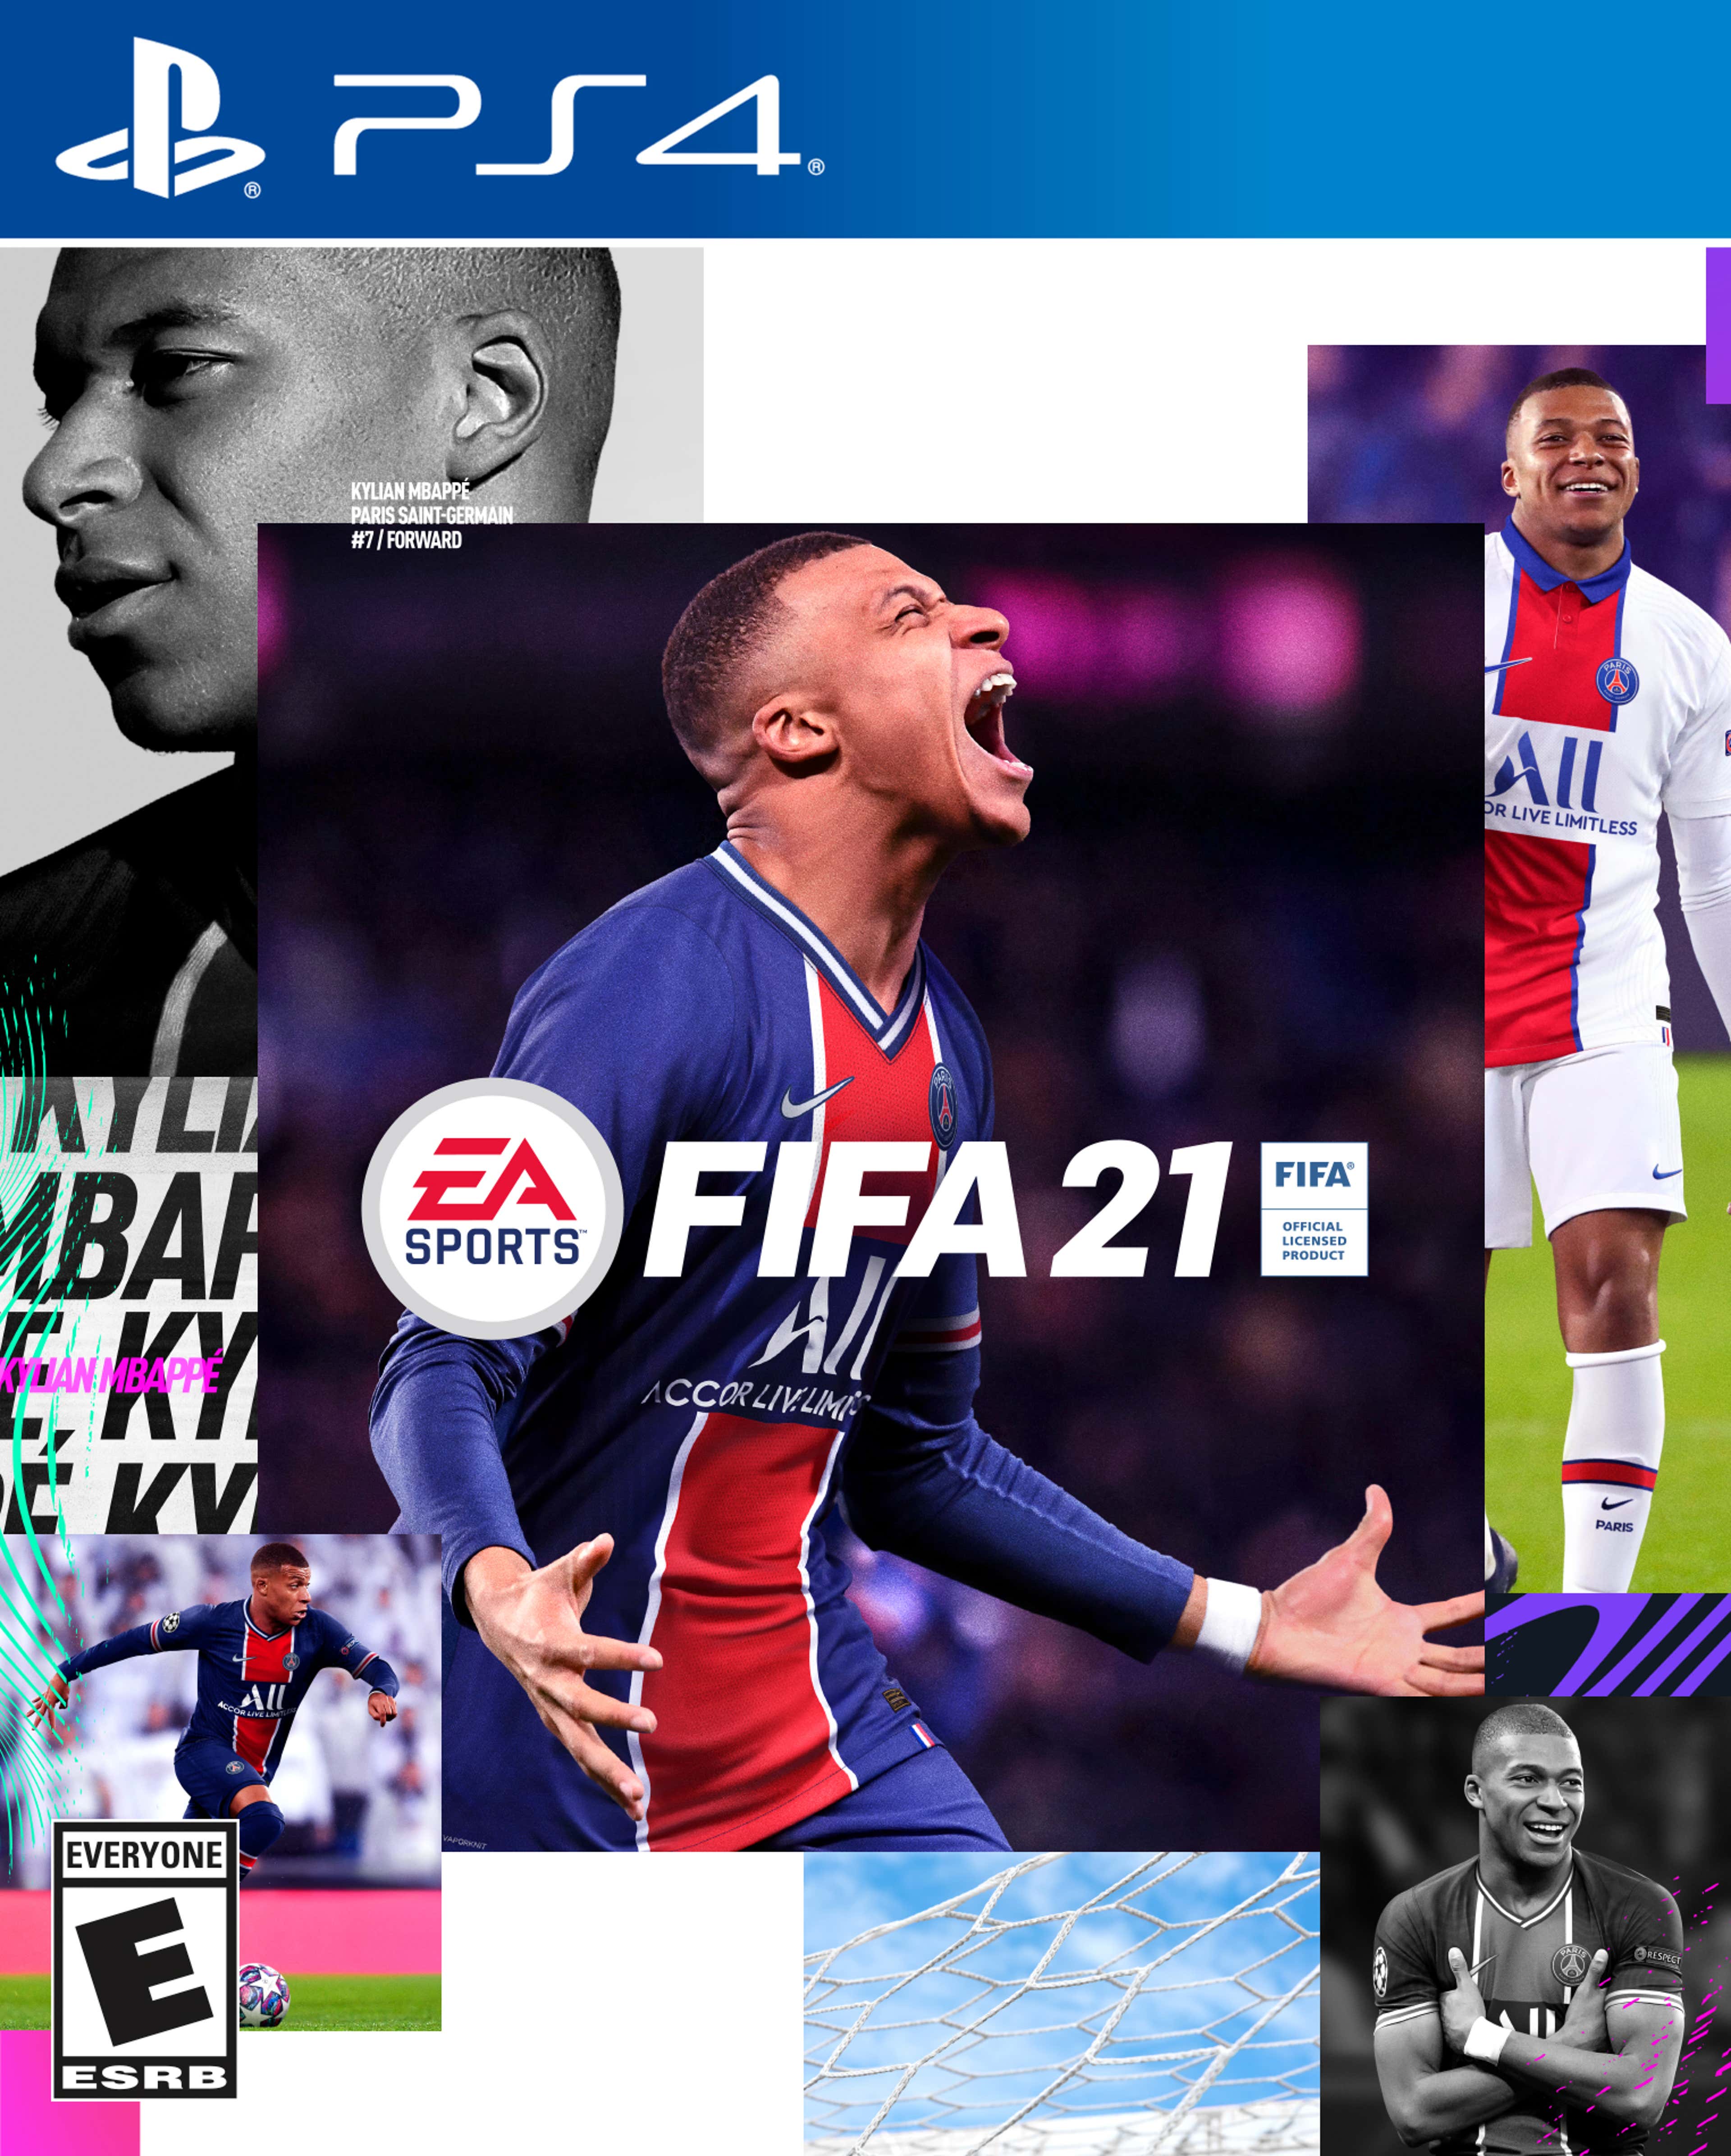 FIFA 22: Release dates, price, consoles, new features & pre-order details